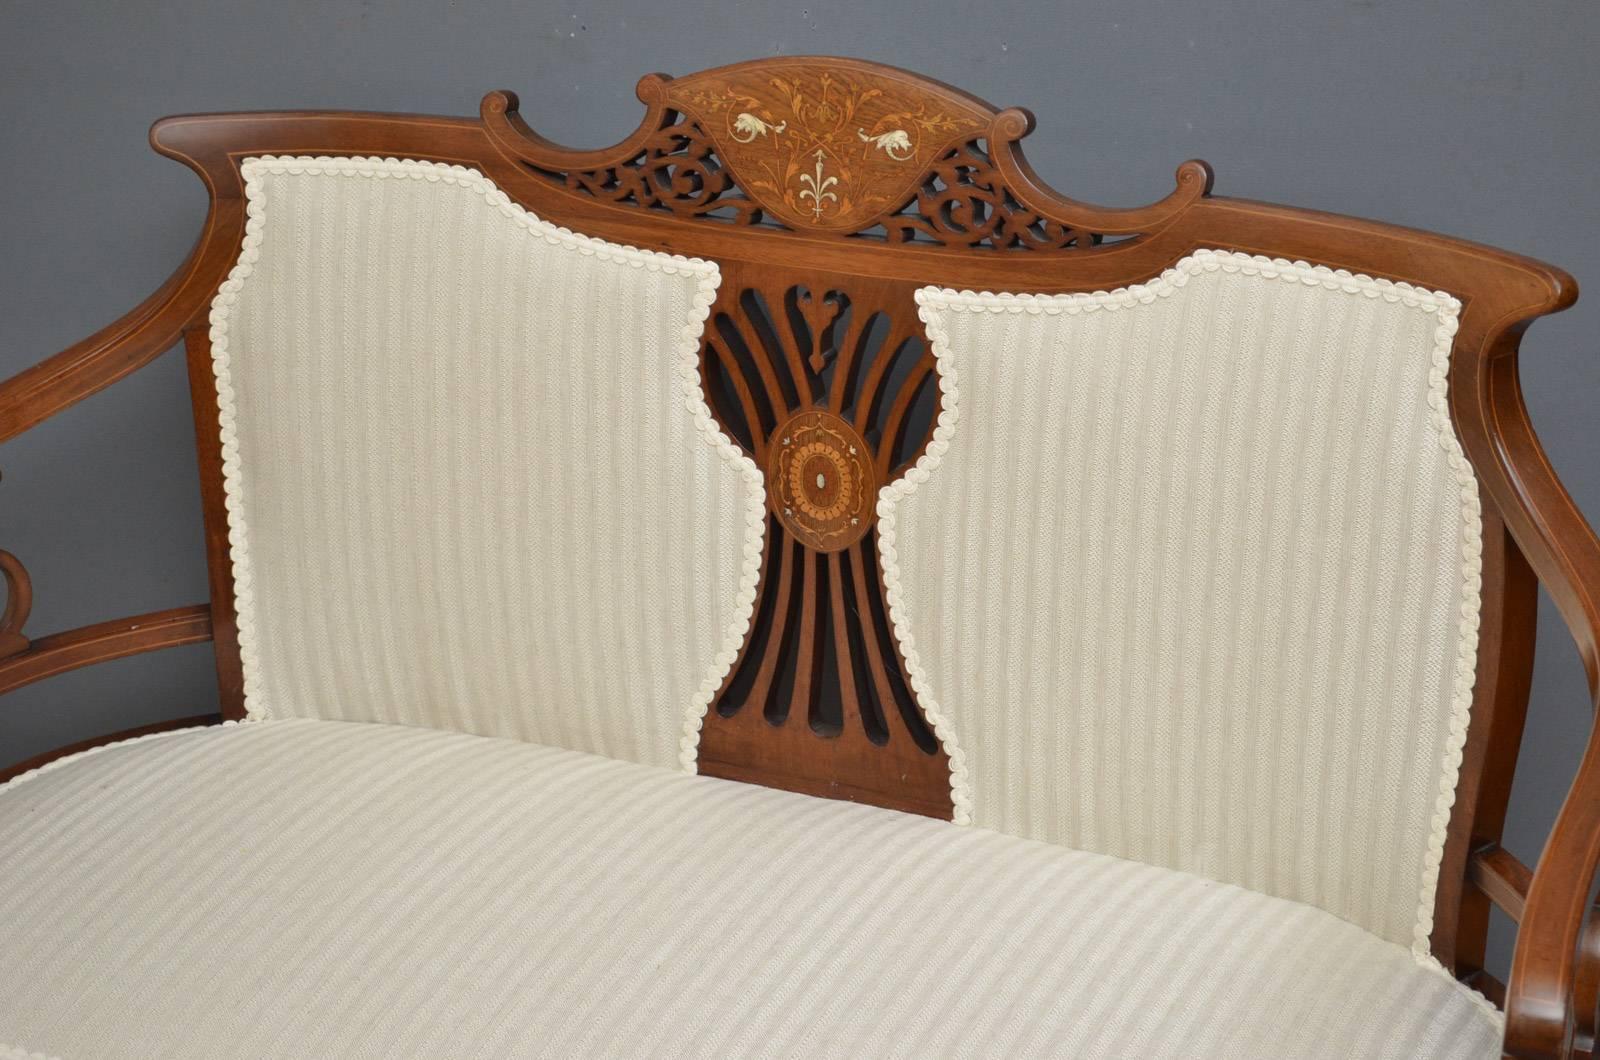 Sn4188 Edwardian mahogany and inlaid settee or couch, having finely inlaid top rail with fretwork and two upholstered panels, string inlaid open arms and shaped seat with string inlaid front rail, all standing on cabriole legs and pad feet. This